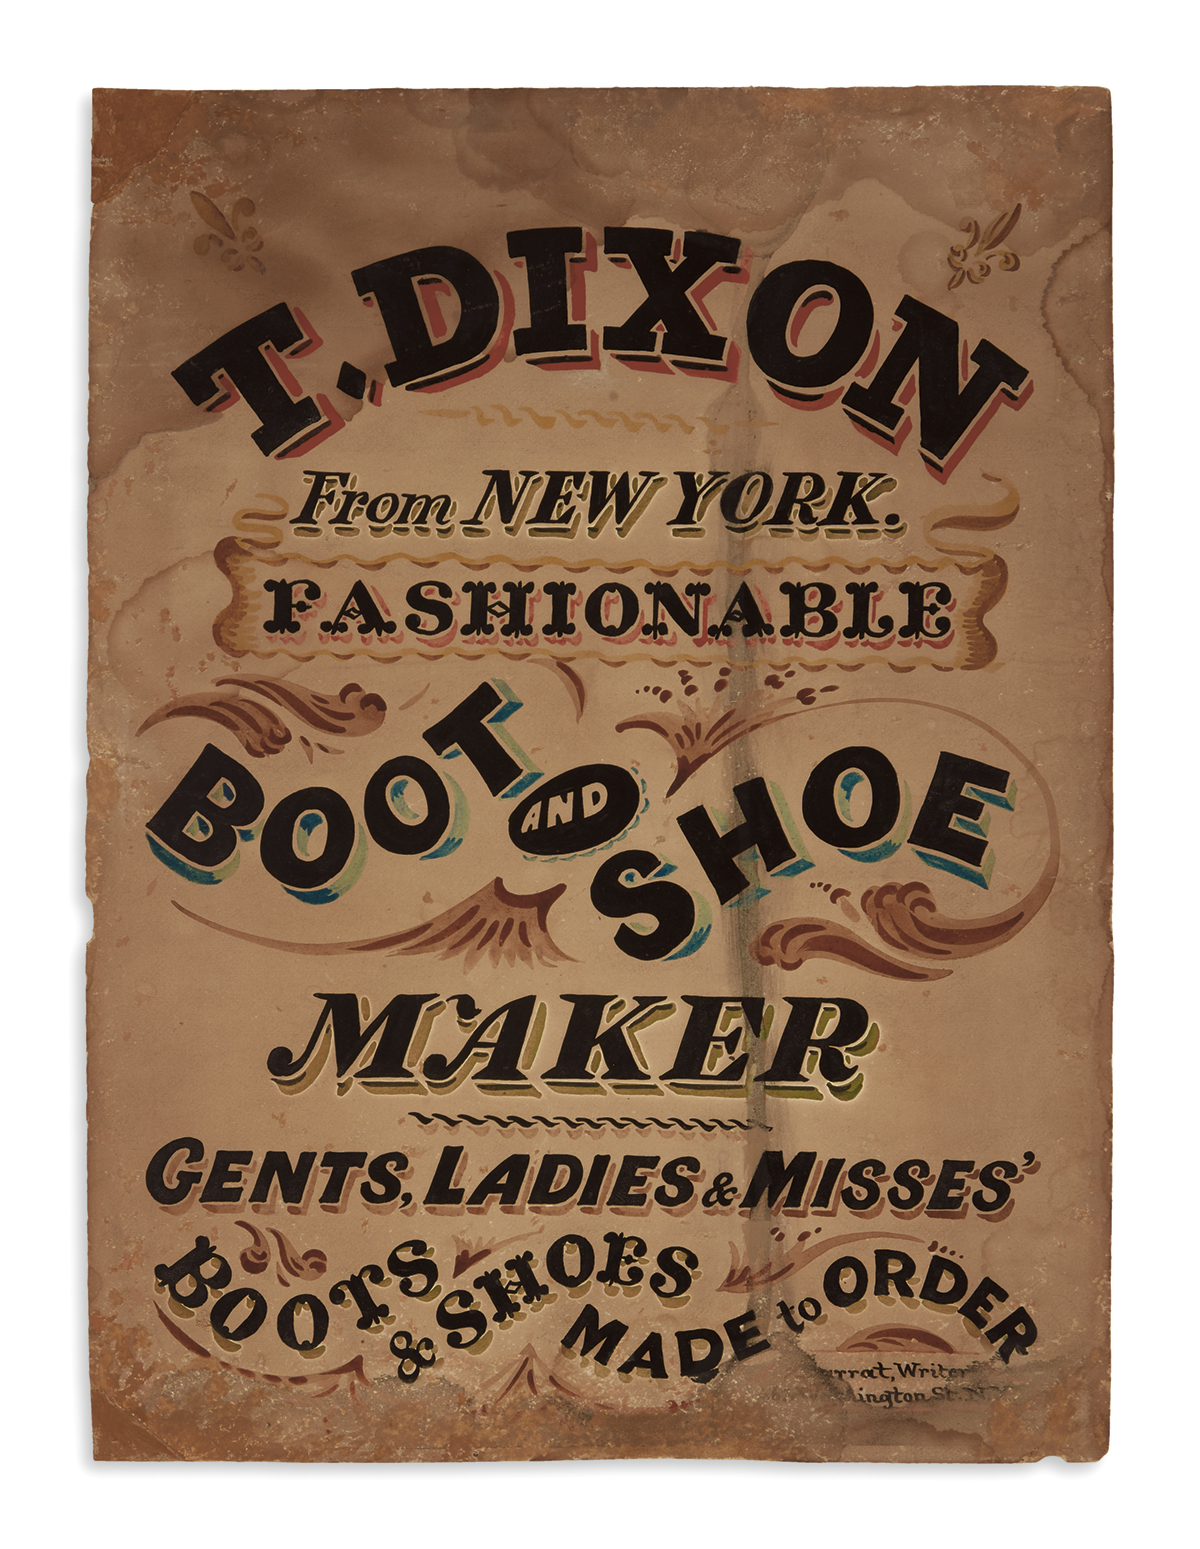 (NEW YORK CITY.) T. Dixon from New York, Fashionable Boot and Shoe Maker, Gents, Ladies & Misses Boots & Shoes Made to Order.